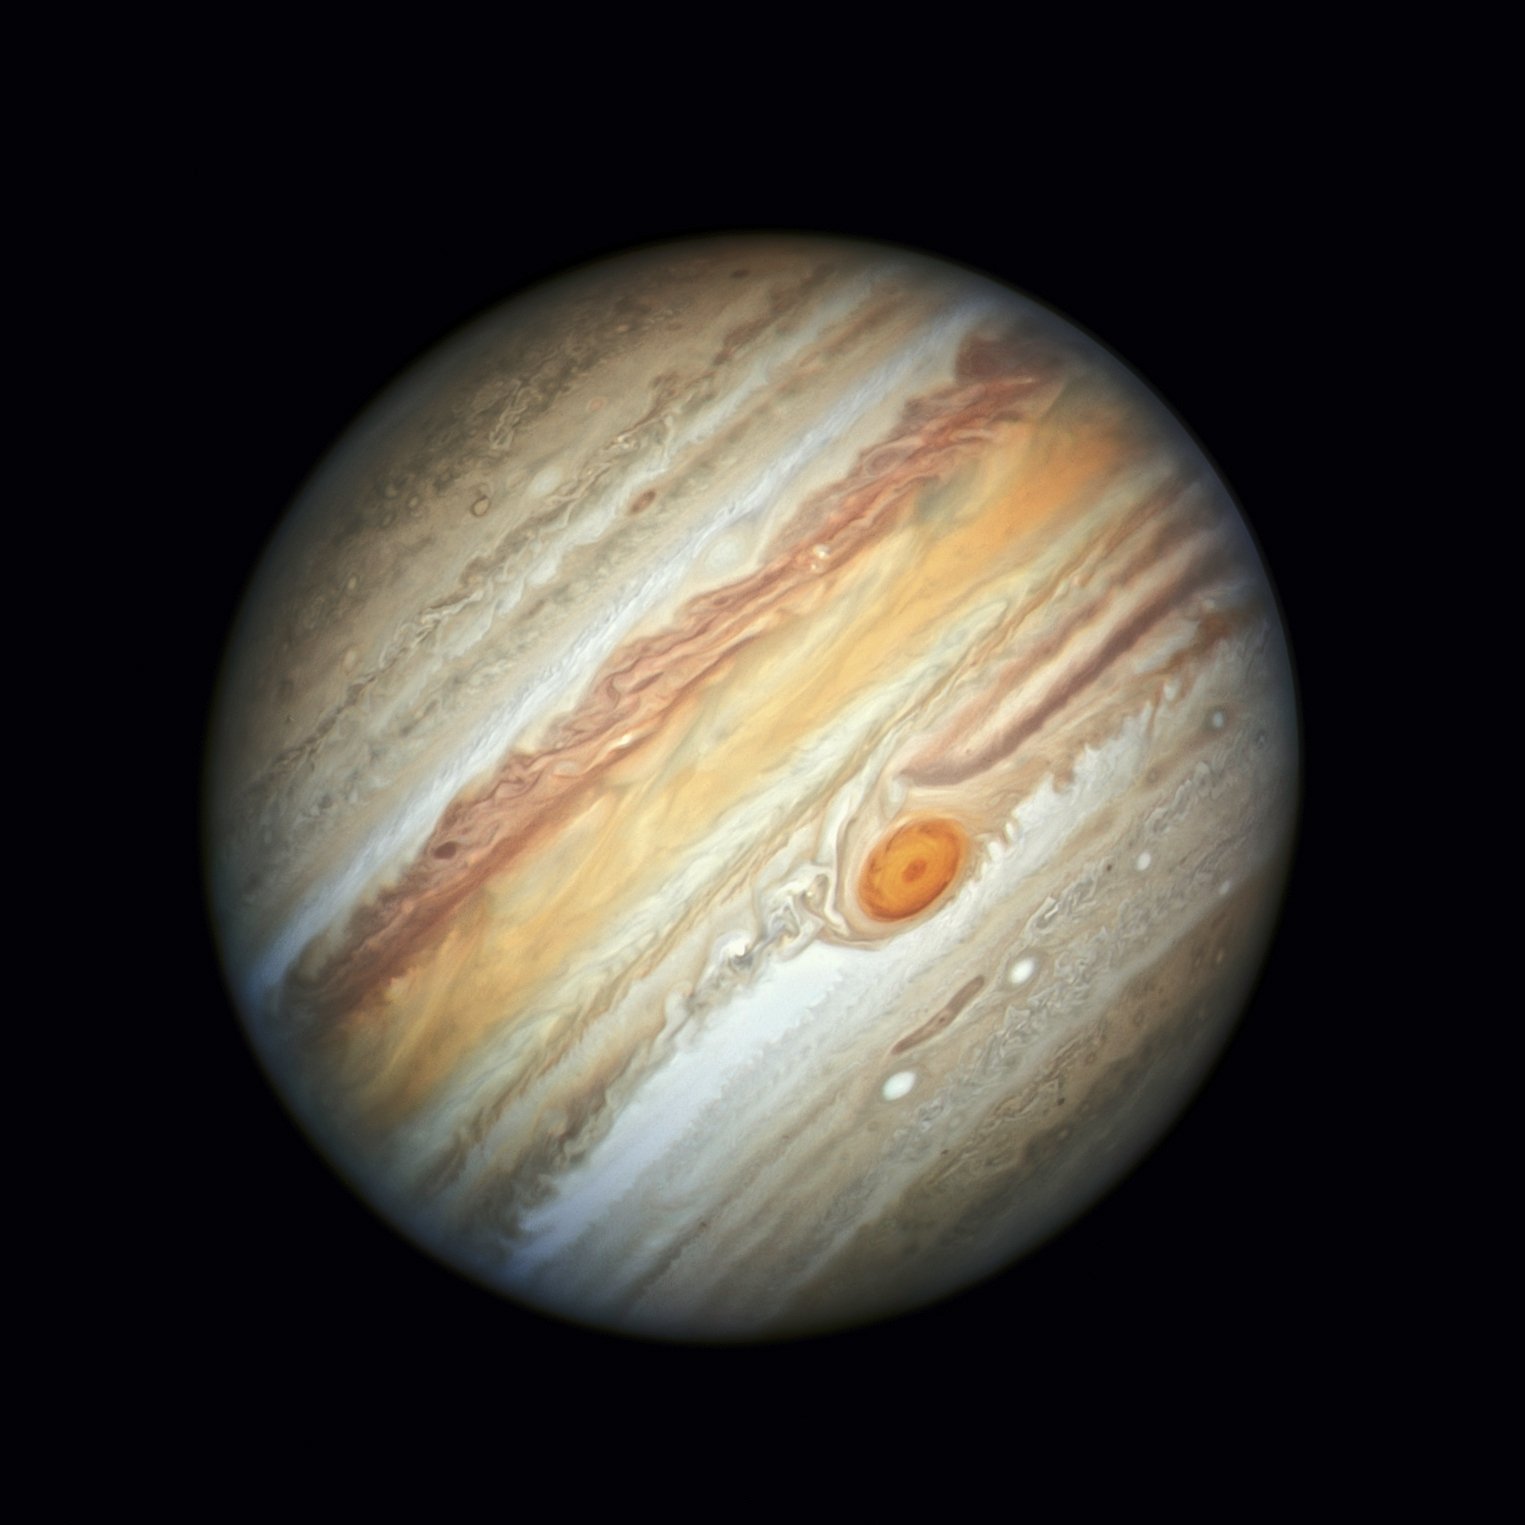 The planet Jupiter, captured by the Hubble Space Telescope, June 27, 2019. (AP Photo)